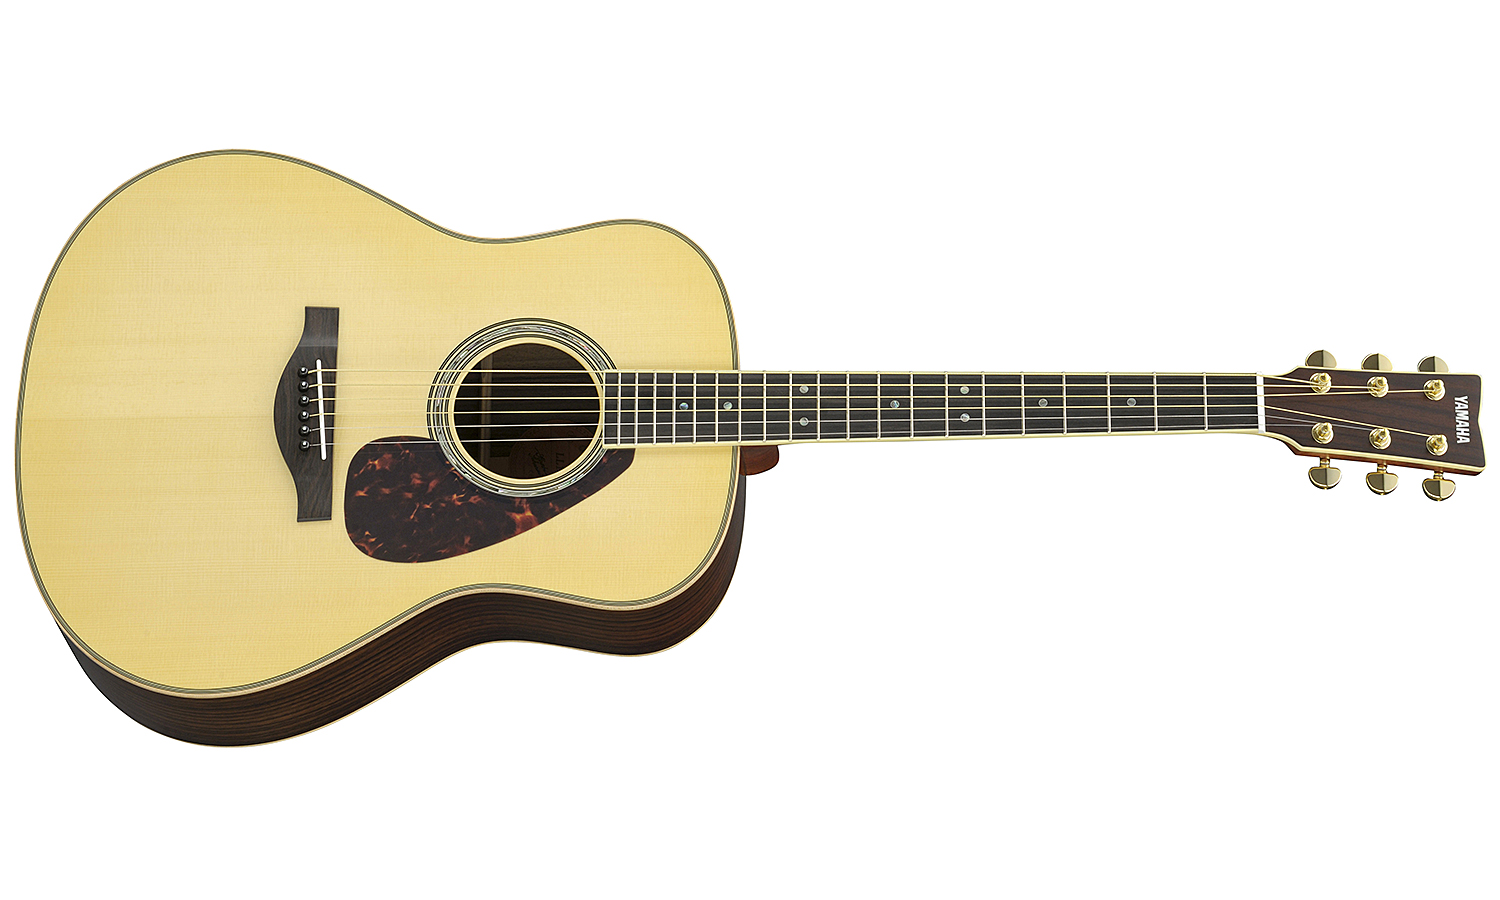 Yamaha Ll16 Are Jumbo Epicea Palissandre Eb - Natural - Guitare Electro Acoustique - Variation 1